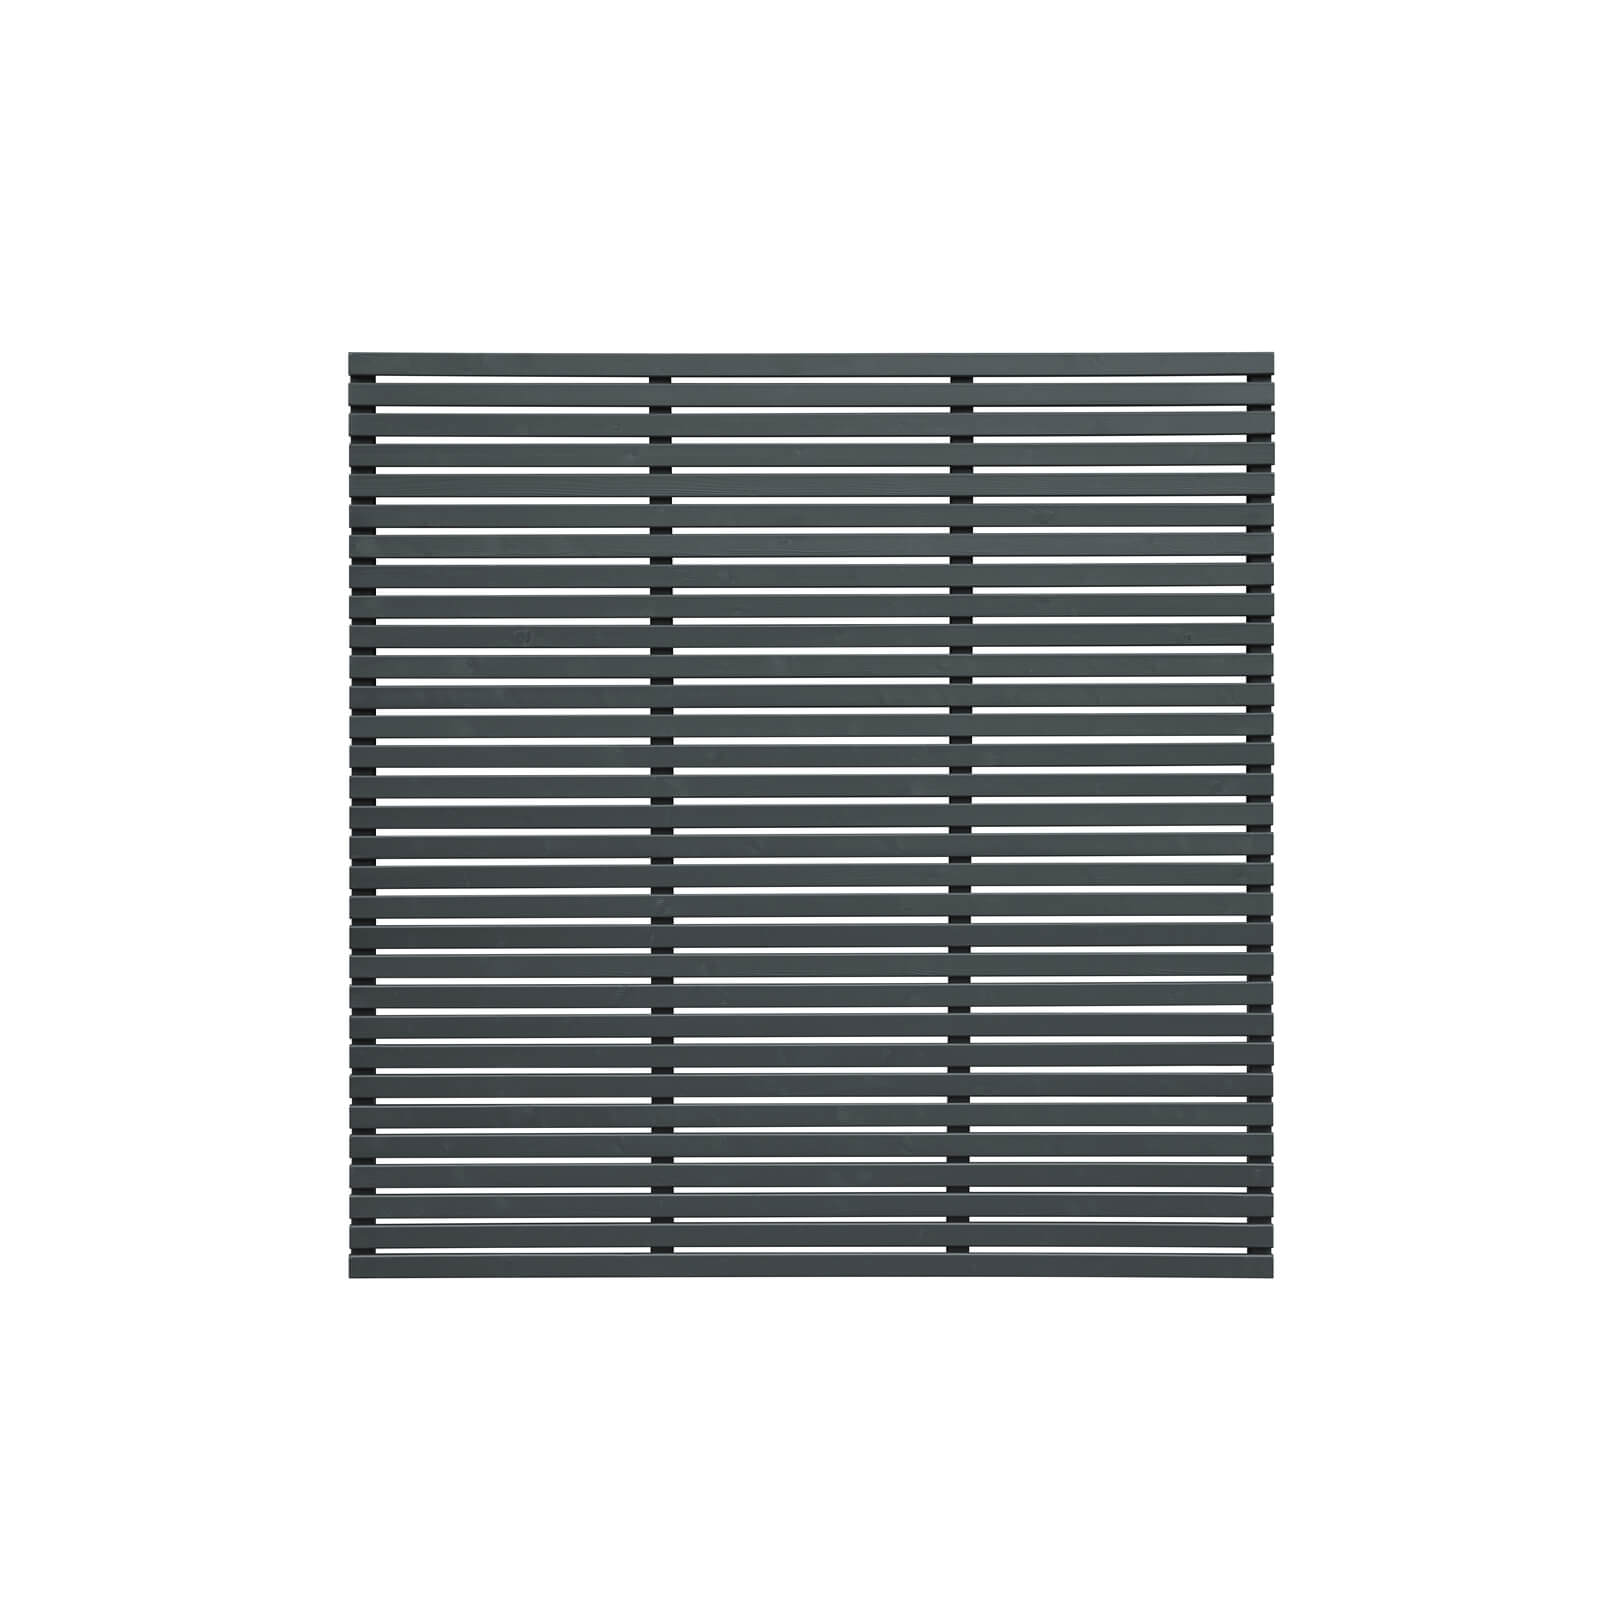 6ft x 6ft (1.8m x 1.8m) Grey Painted Contemporary Slatted Fence Panel - Pack of 4